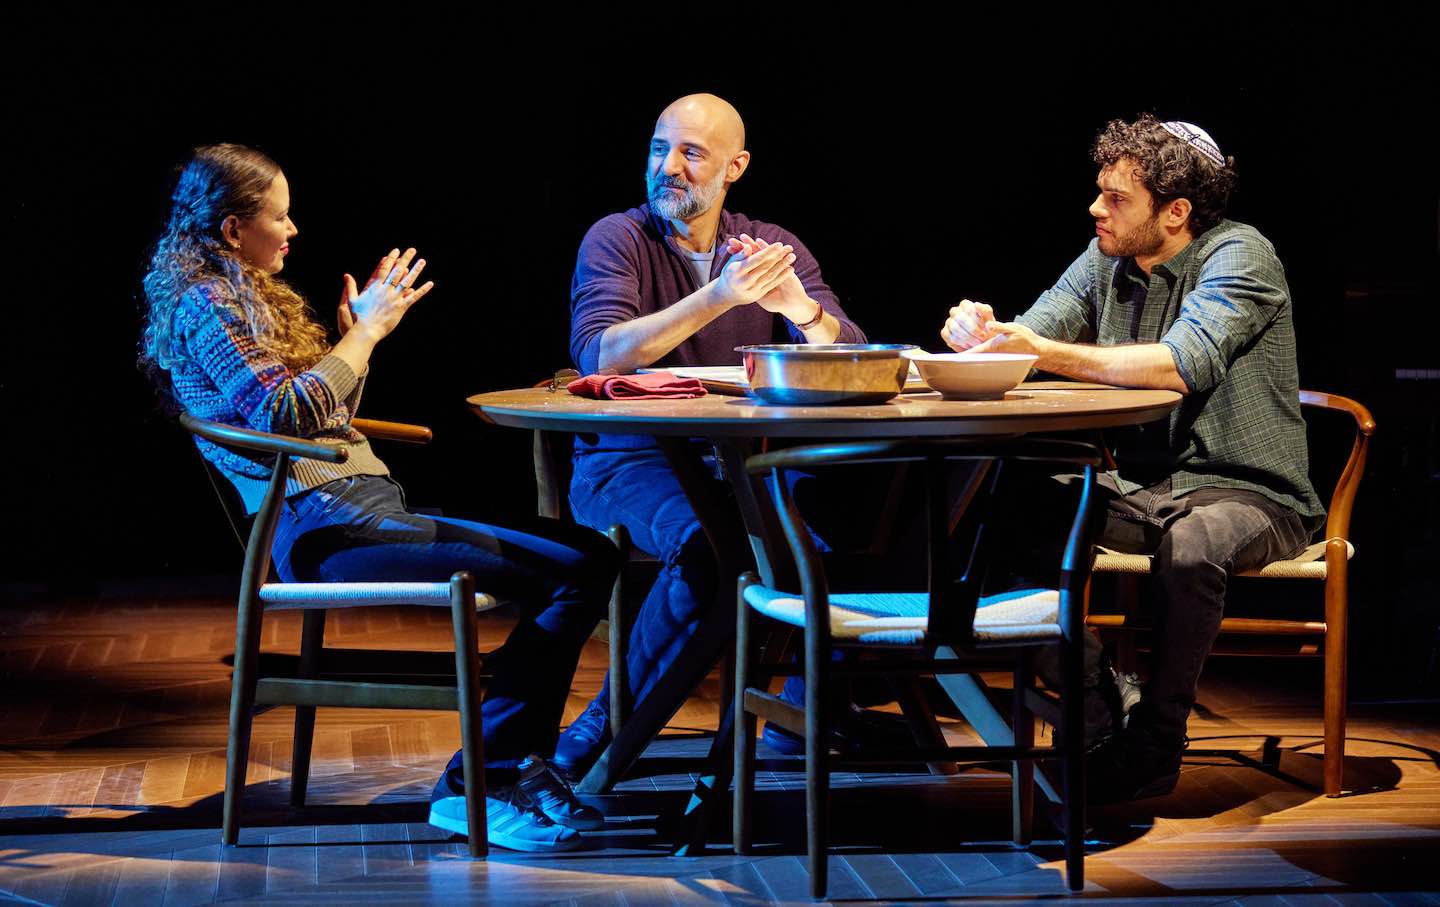 Molly Ranson, Nael Nacer, and Aria Shahghasemi in “Prayer for the French Republic.”